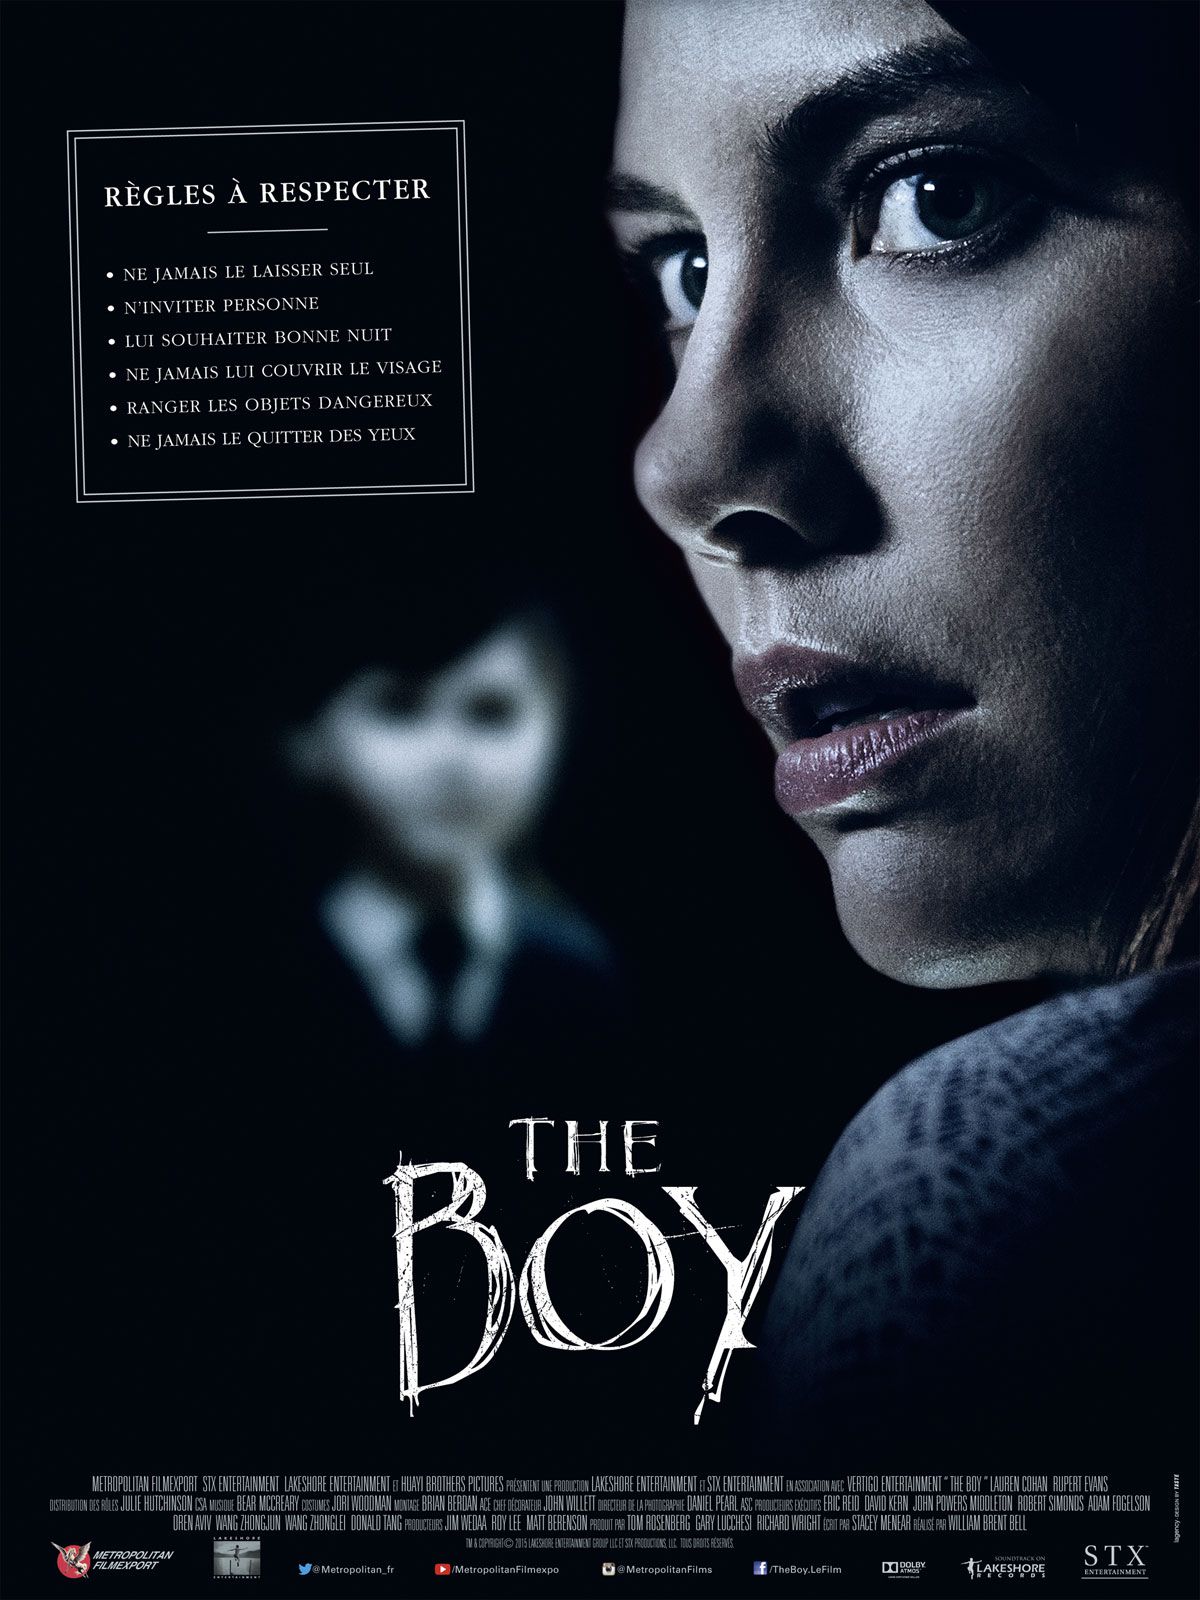 The Boy - Film (2016) streaming VF gratuit complet